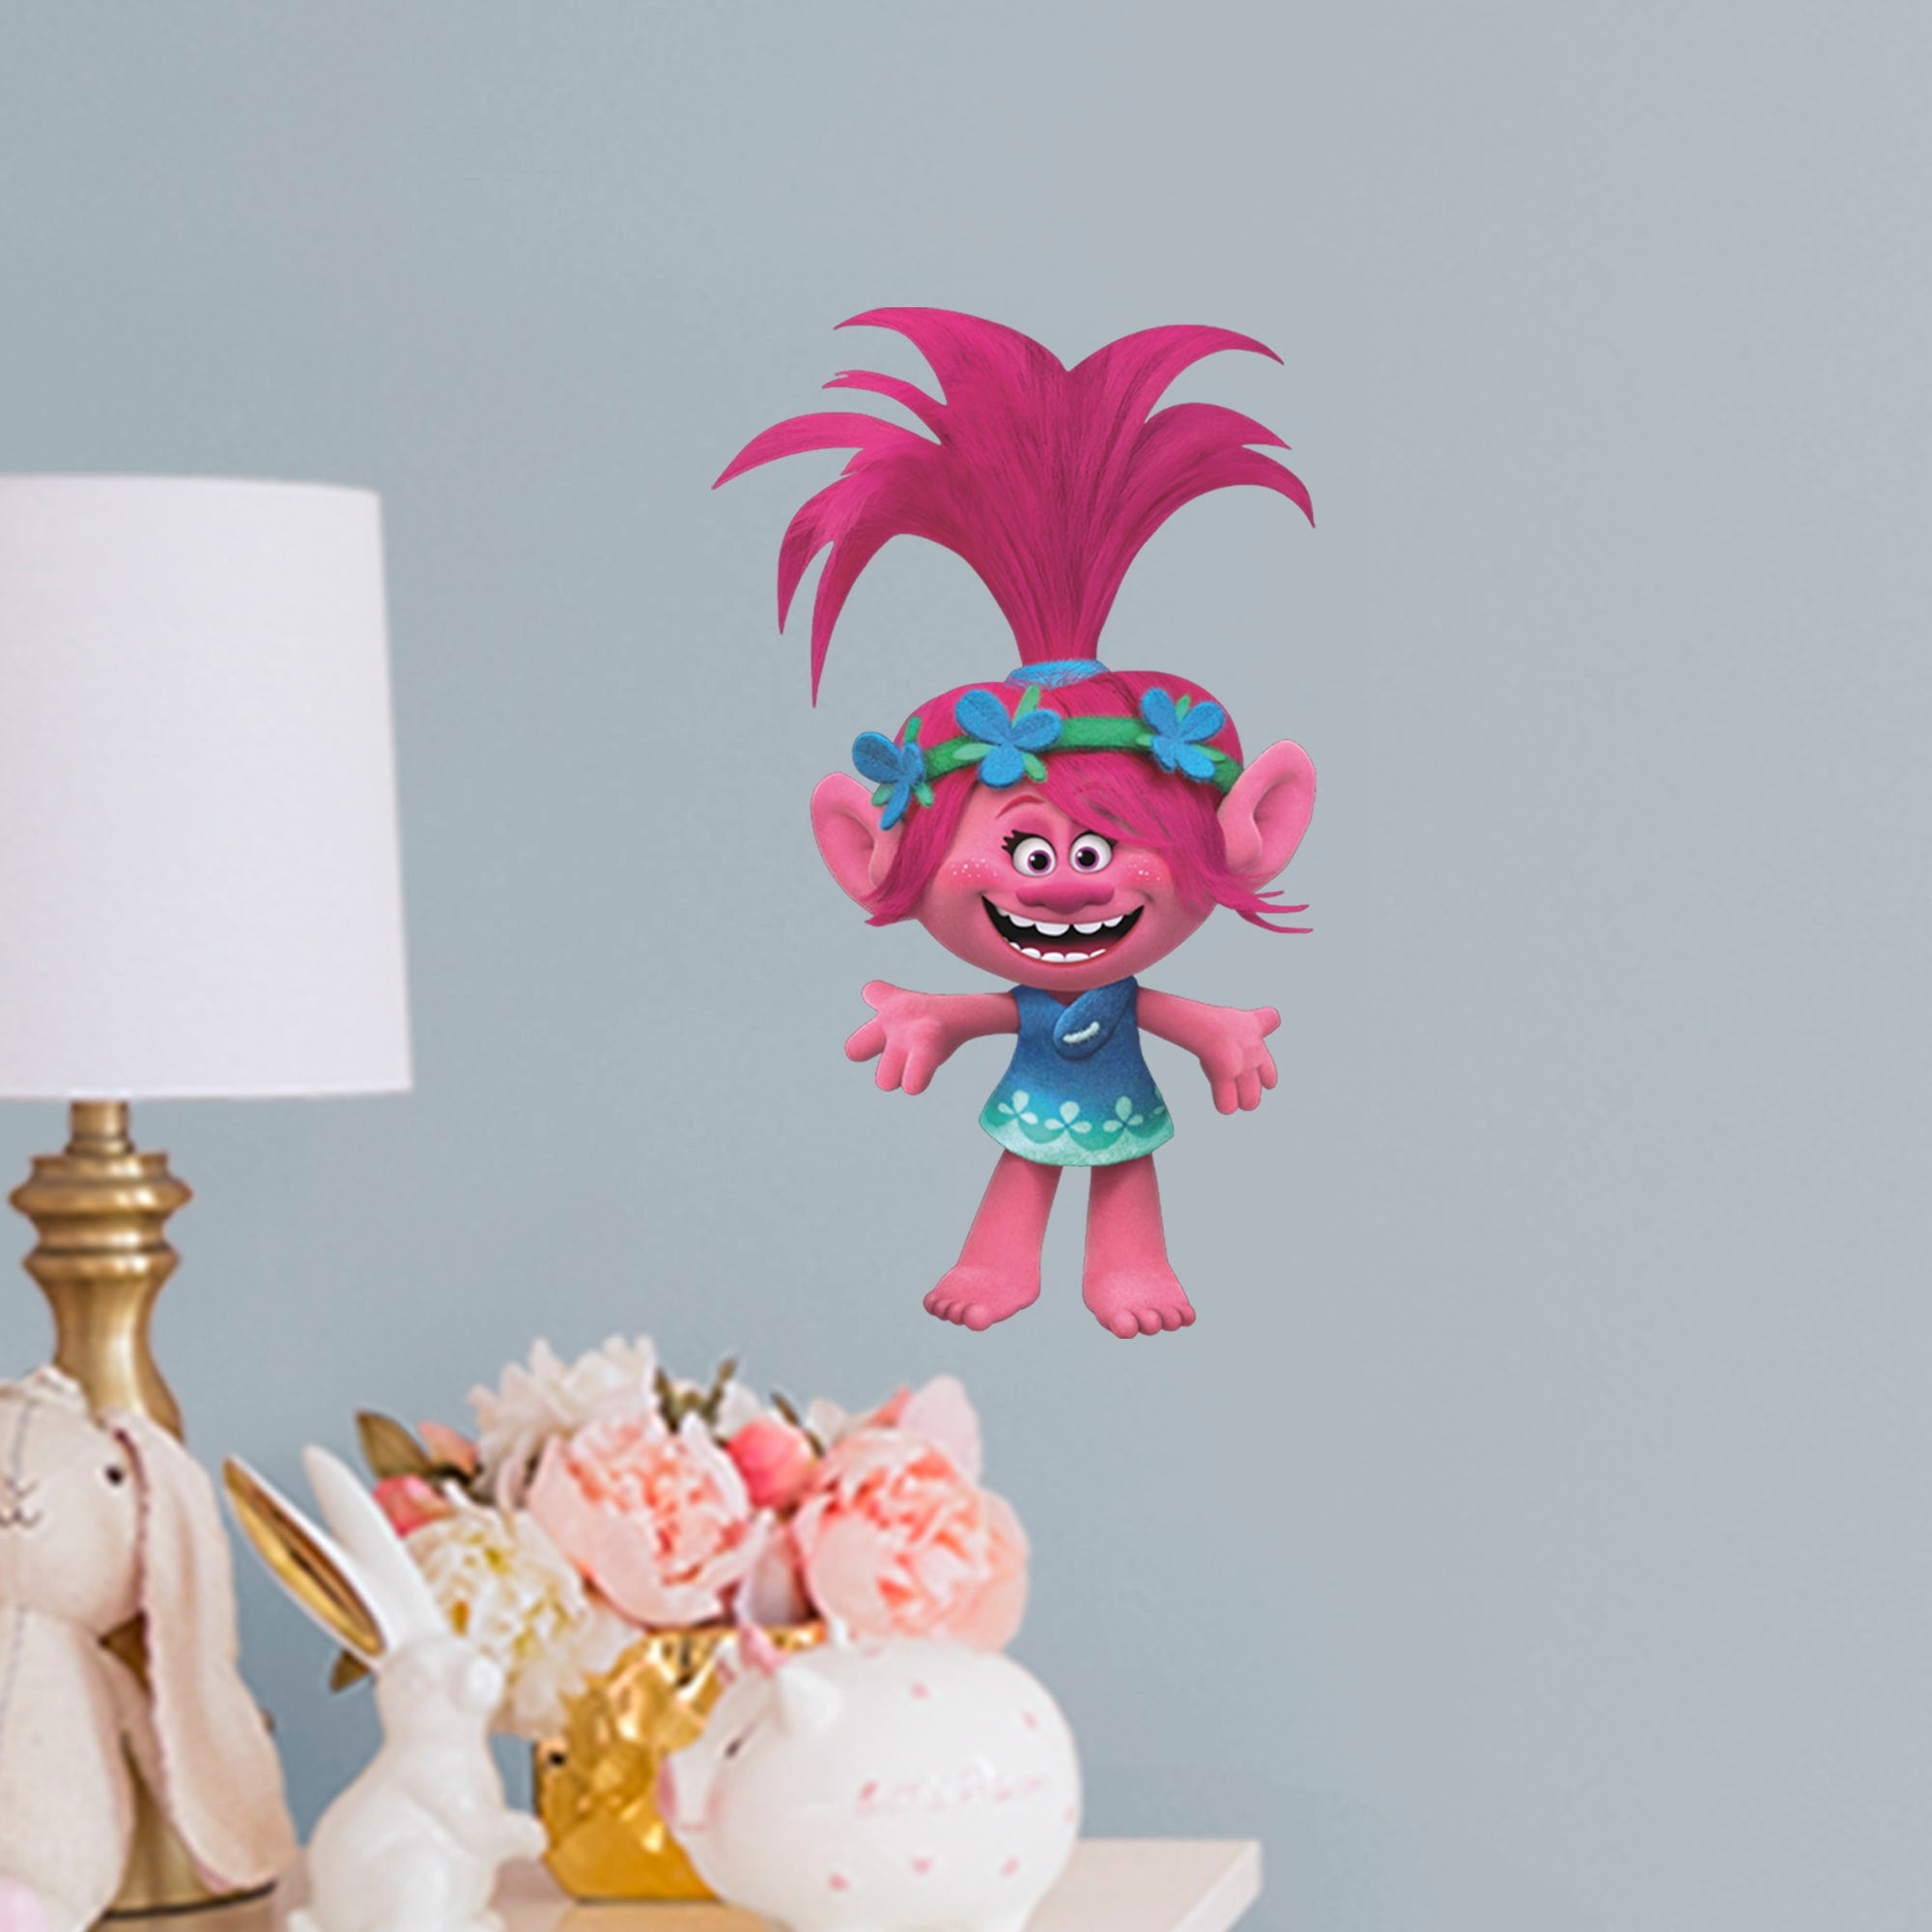 Poppy - Officially Licensed Trolls Removable Wall Decal Large by Fathead | Vinyl